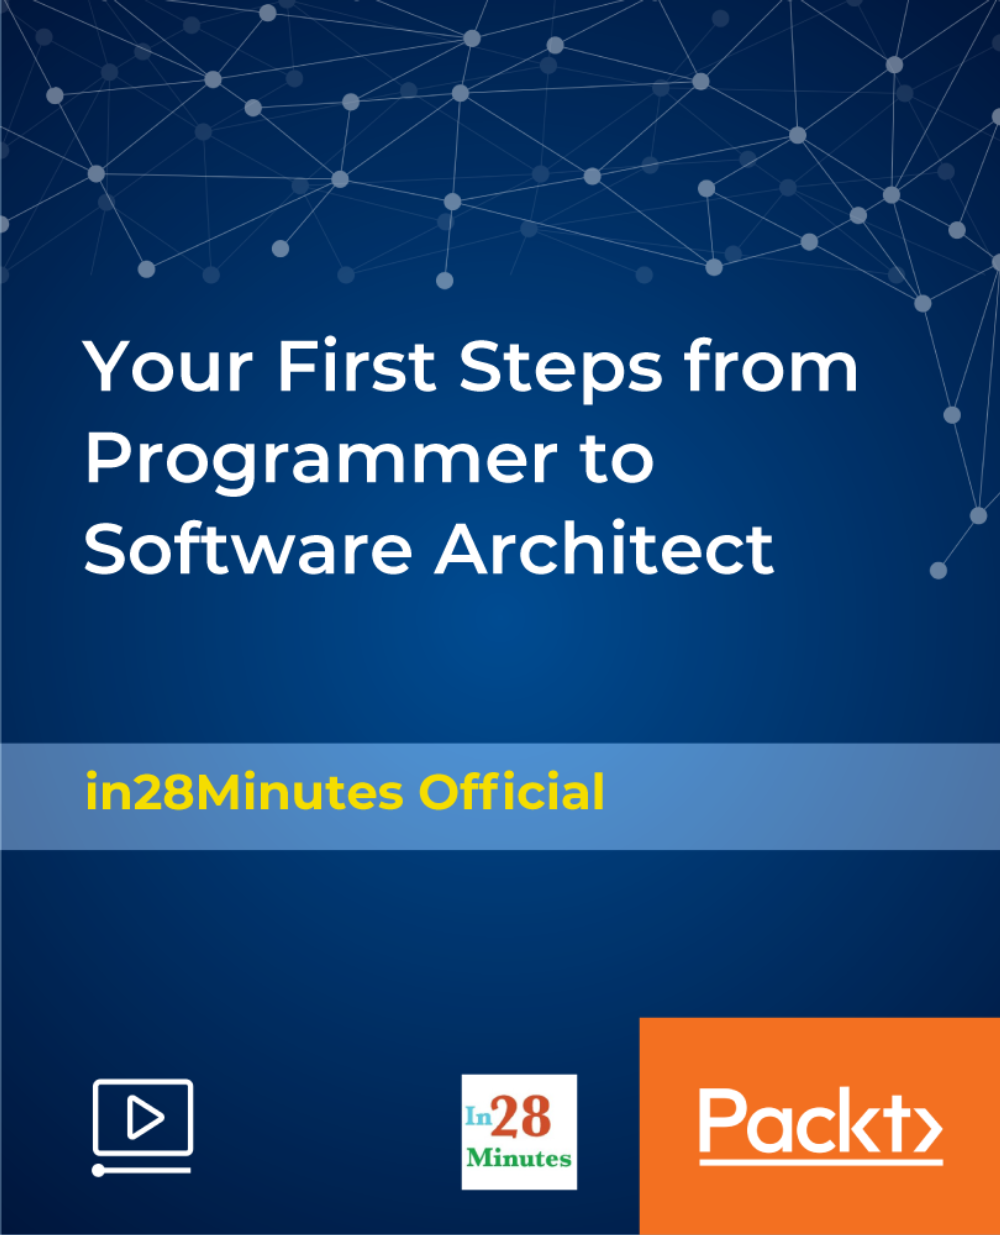 Your First Steps from Programmer to Software Architect